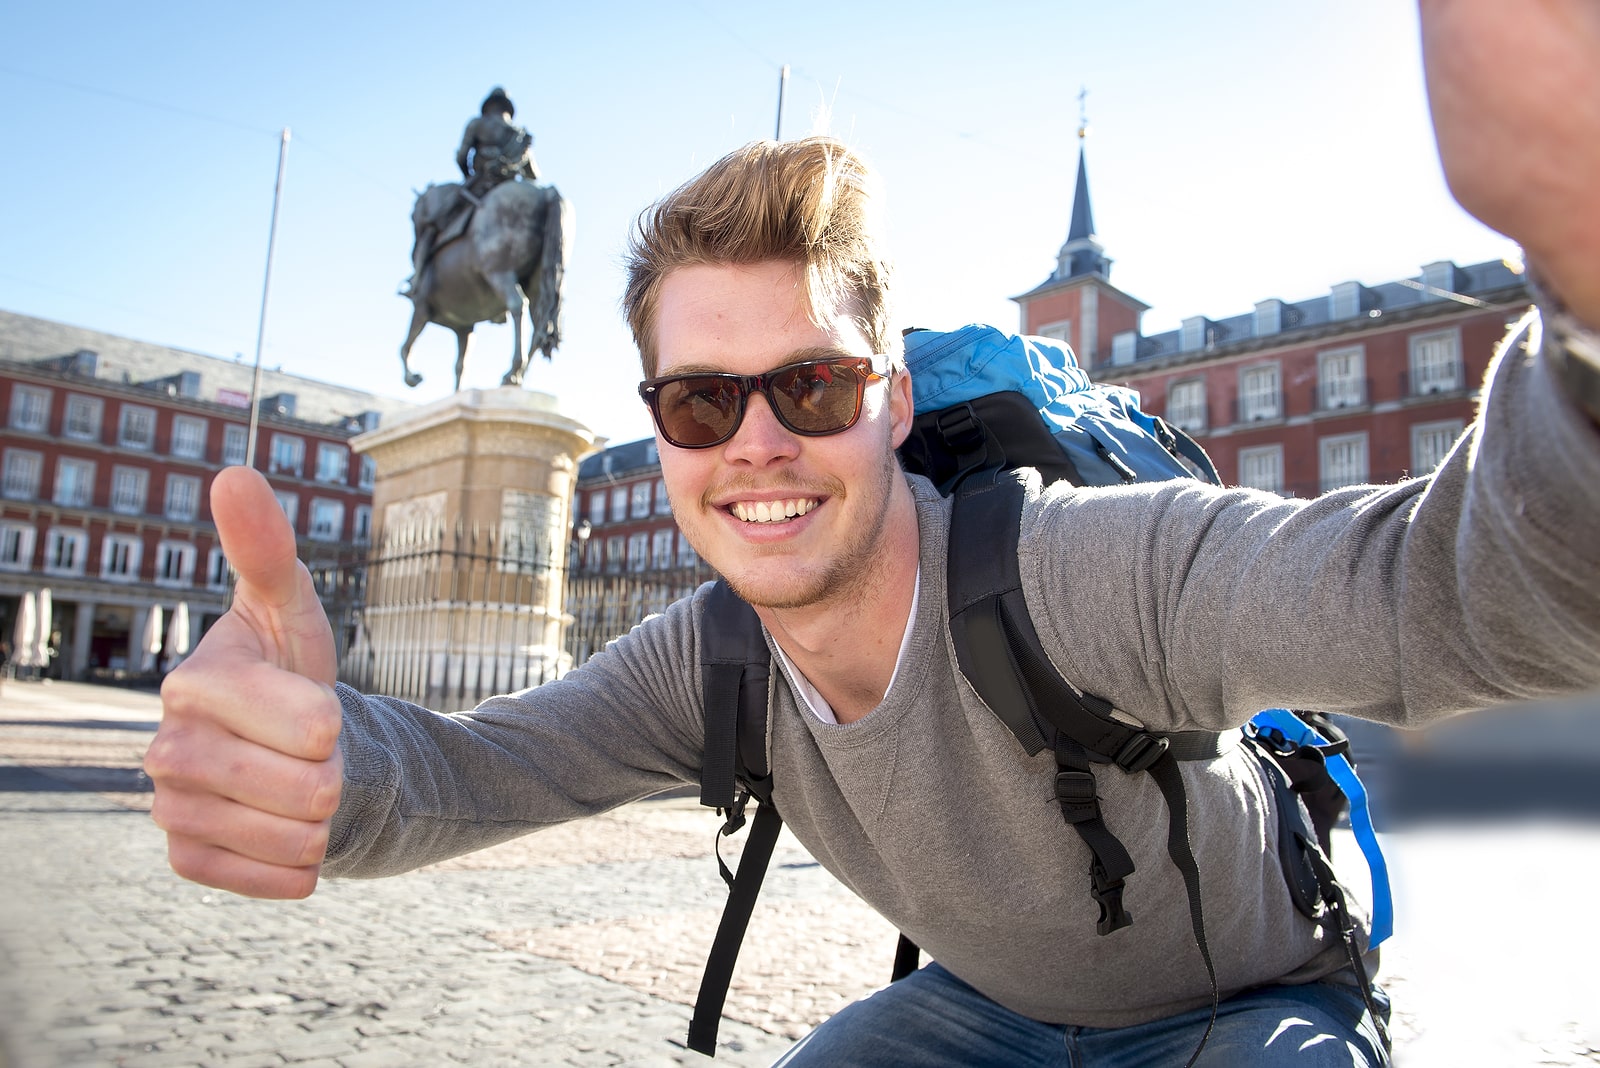 Student Backpacker Tourist Taking Selfie Photo With Mobile Phone